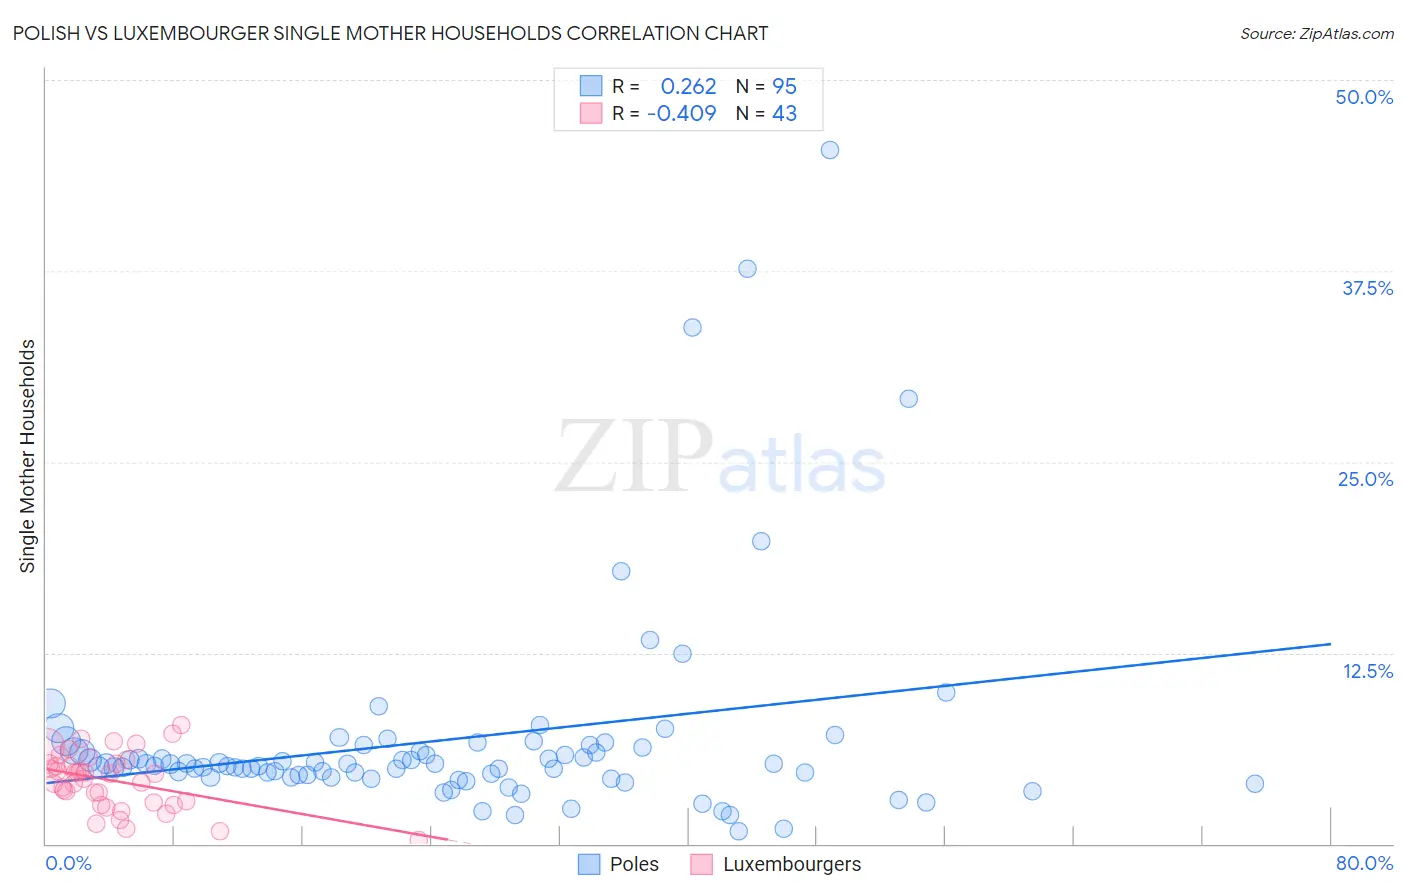 Polish vs Luxembourger Single Mother Households